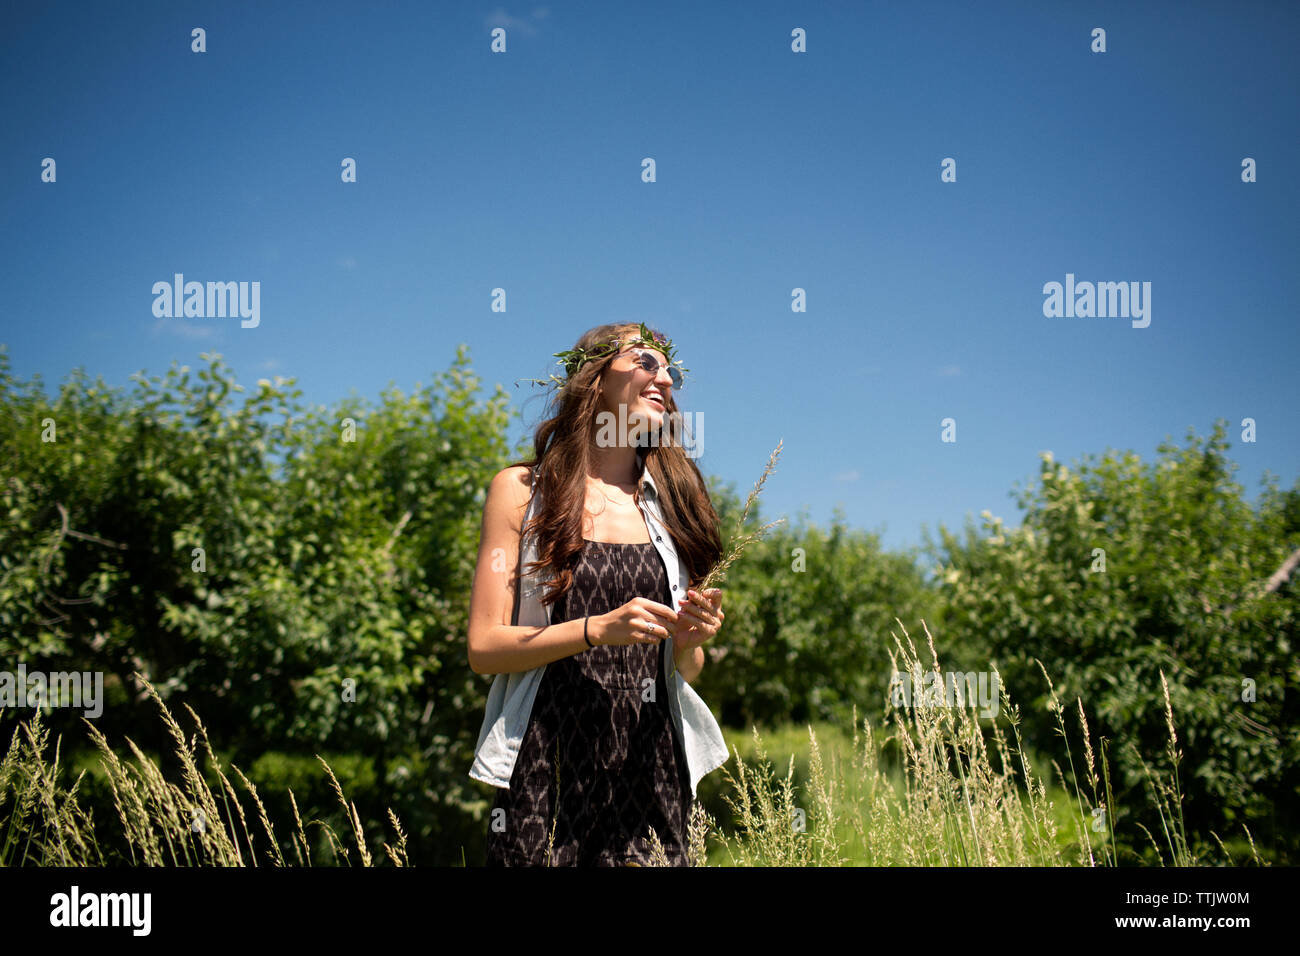 Happy woman wearing tiara standing on field against blue sky Stock Photo